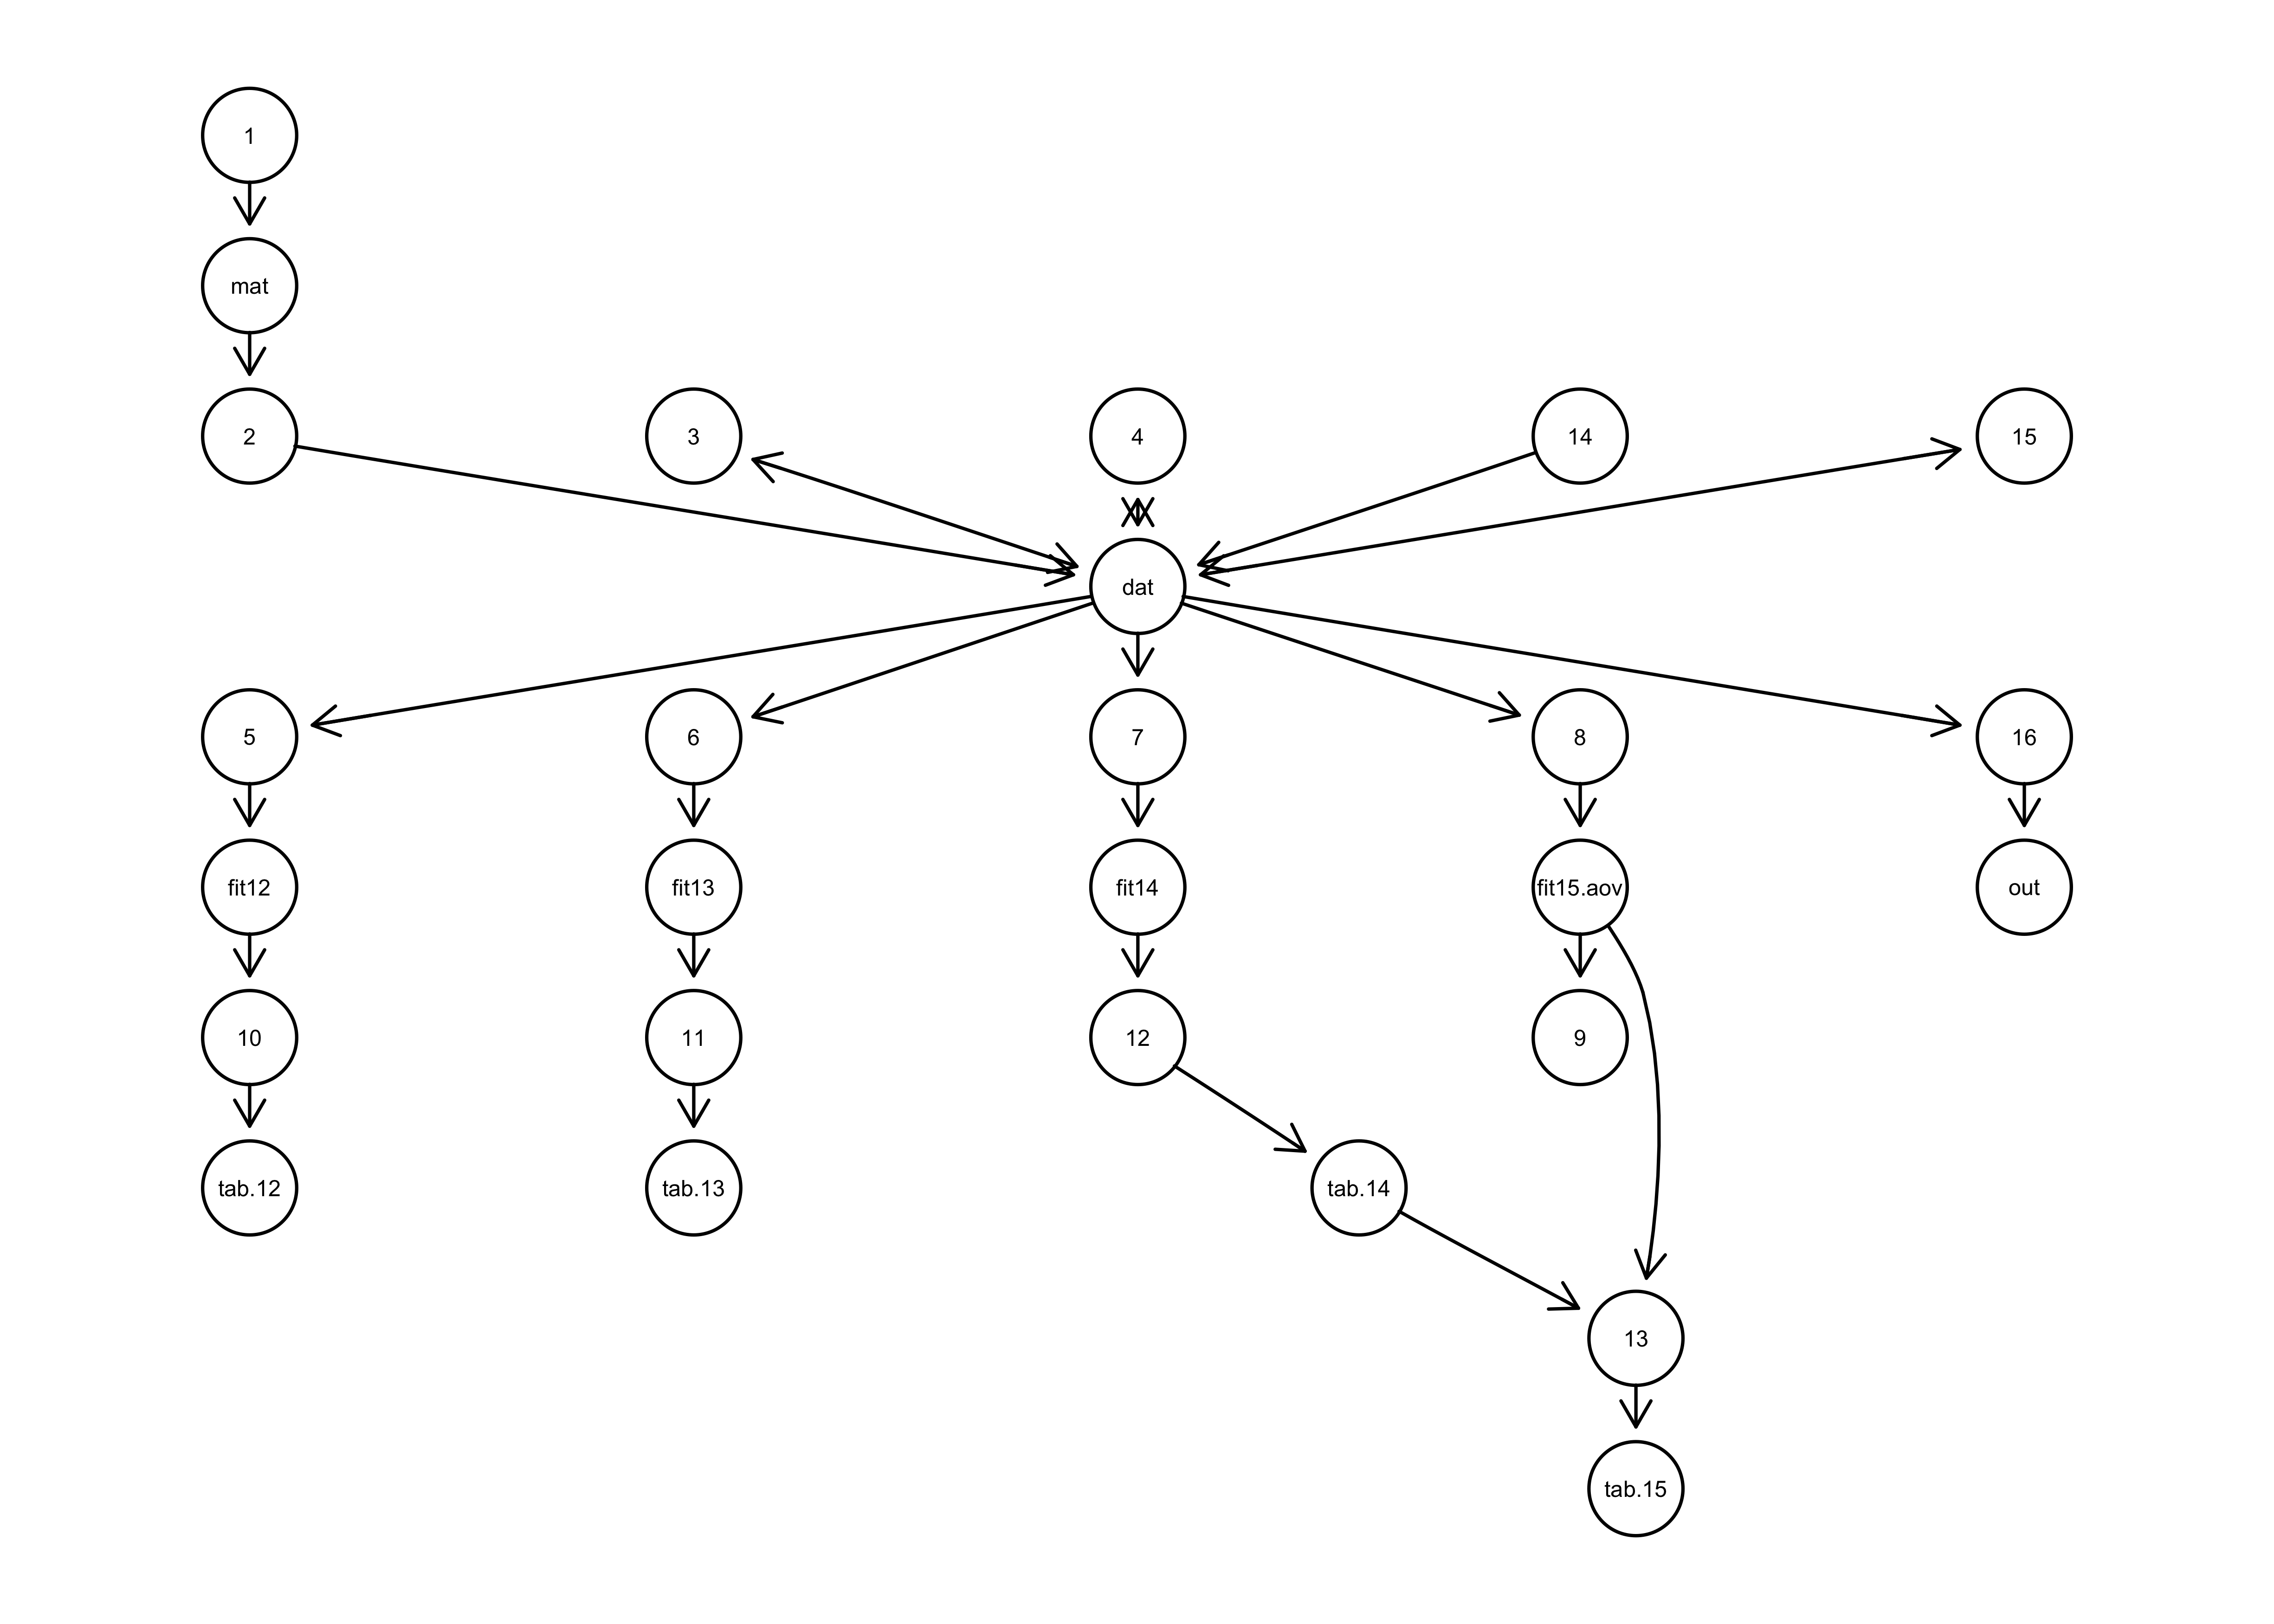 Network diagram of provenance data showing the dependencies of code and variables. Arrows connect functions with the objects that they generate.